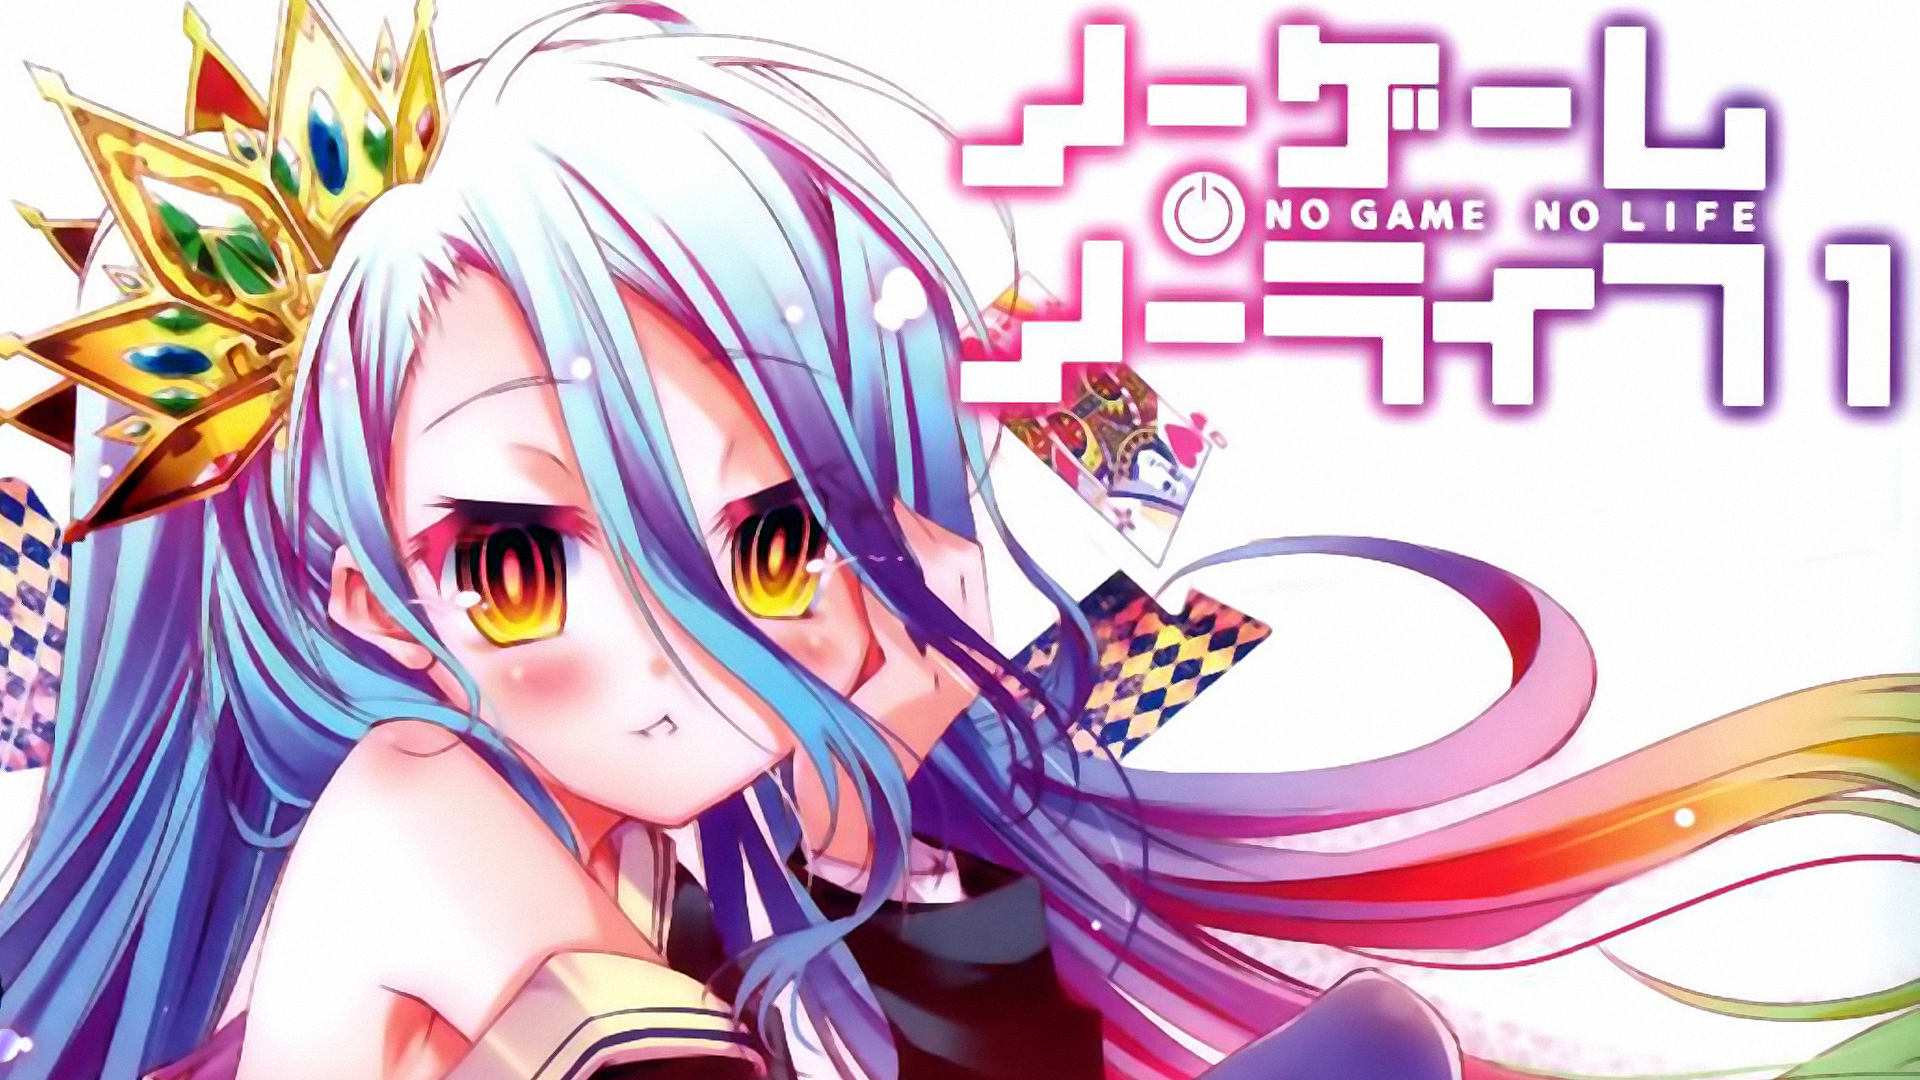 340+ Shiro (No Game No Life) HD Wallpapers and Backgrounds